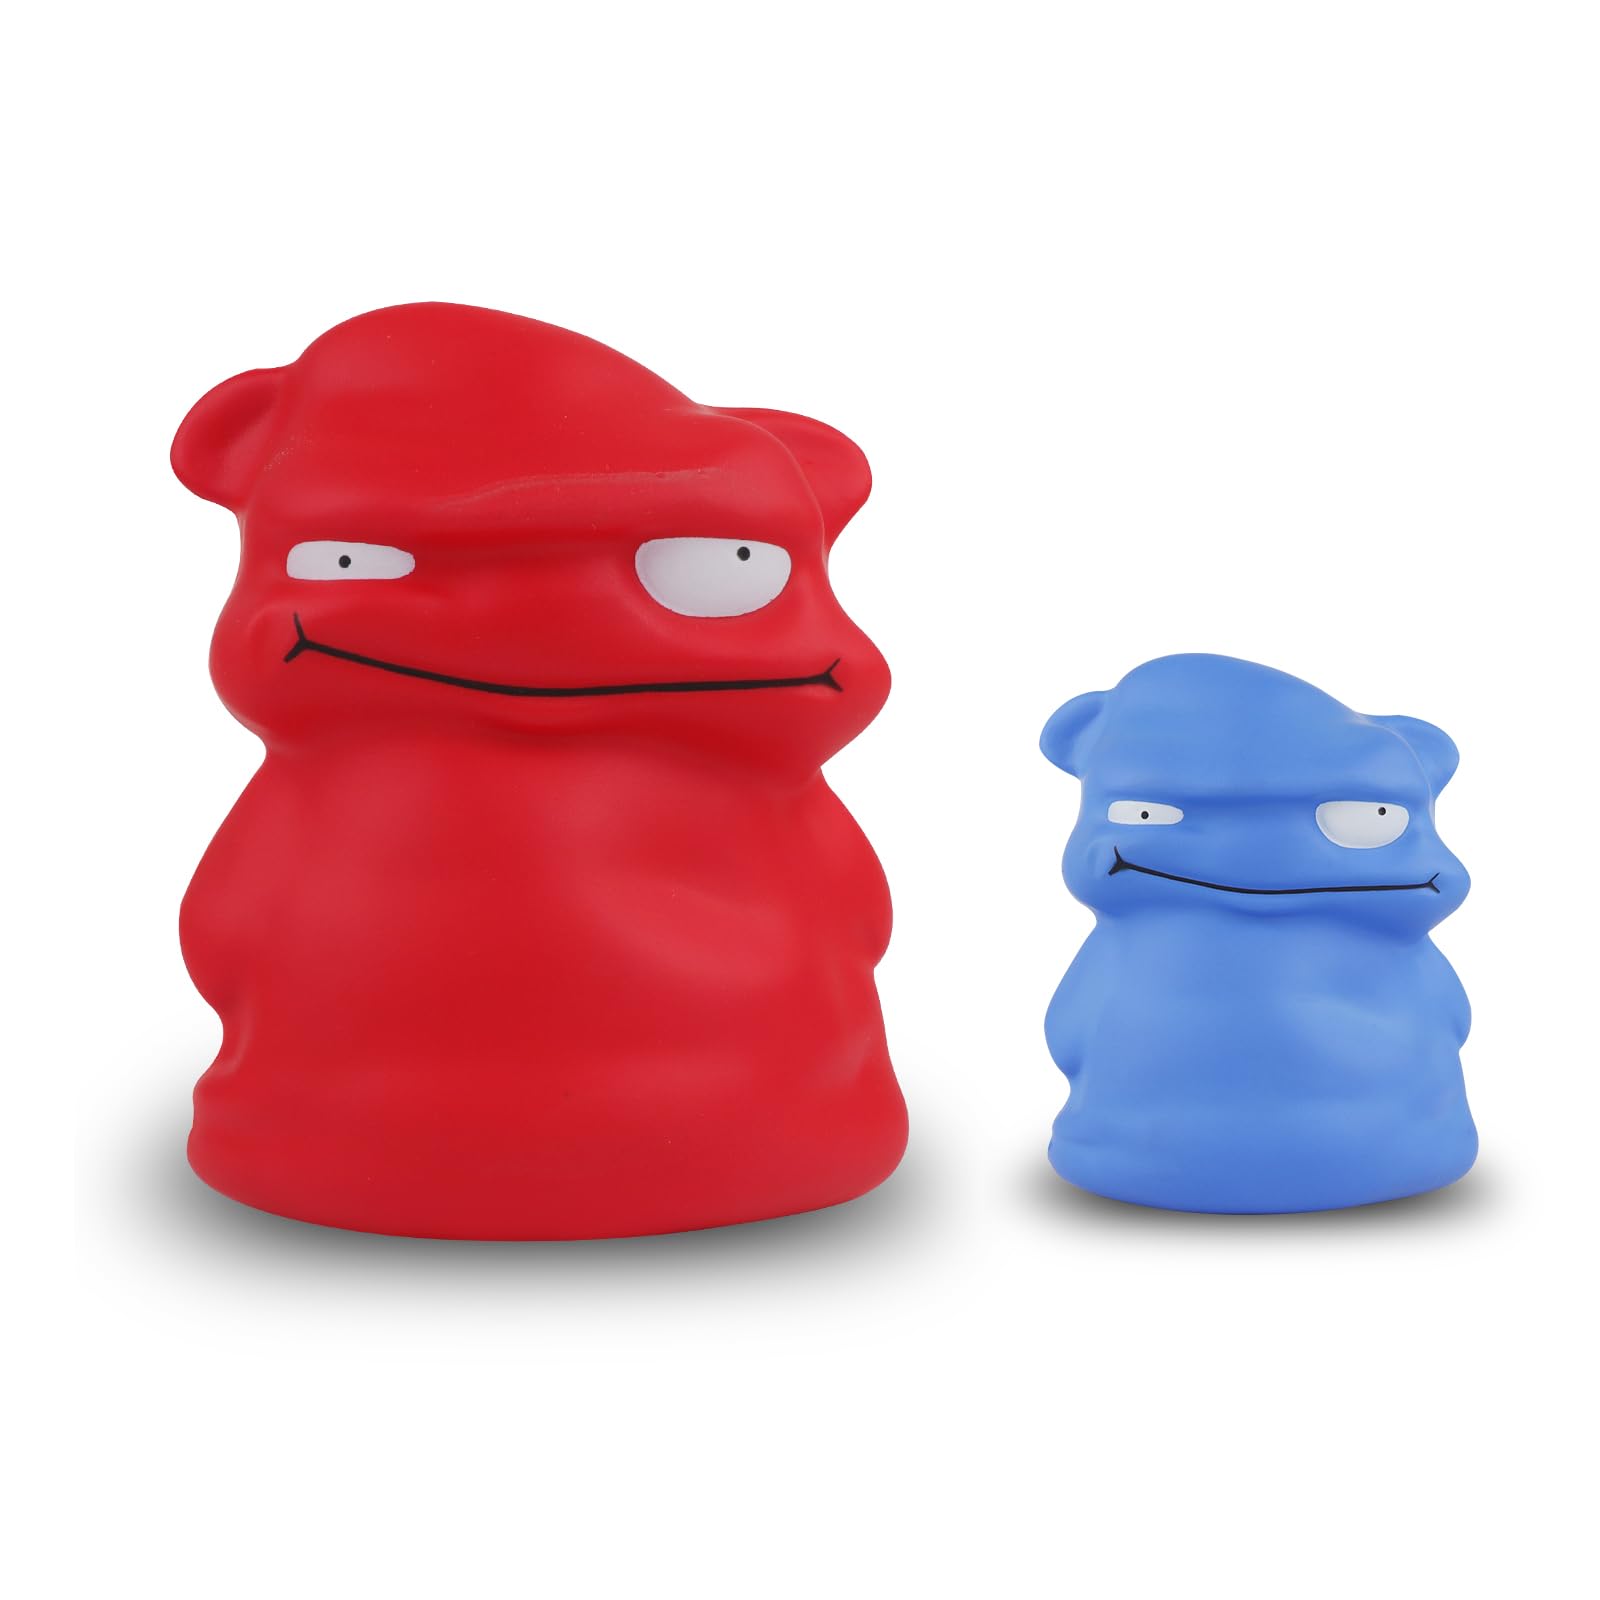 Anboor 2pcs Jumbo Squishies Monsters Soft Slow Rising Scented Squishys (Red& Blue)